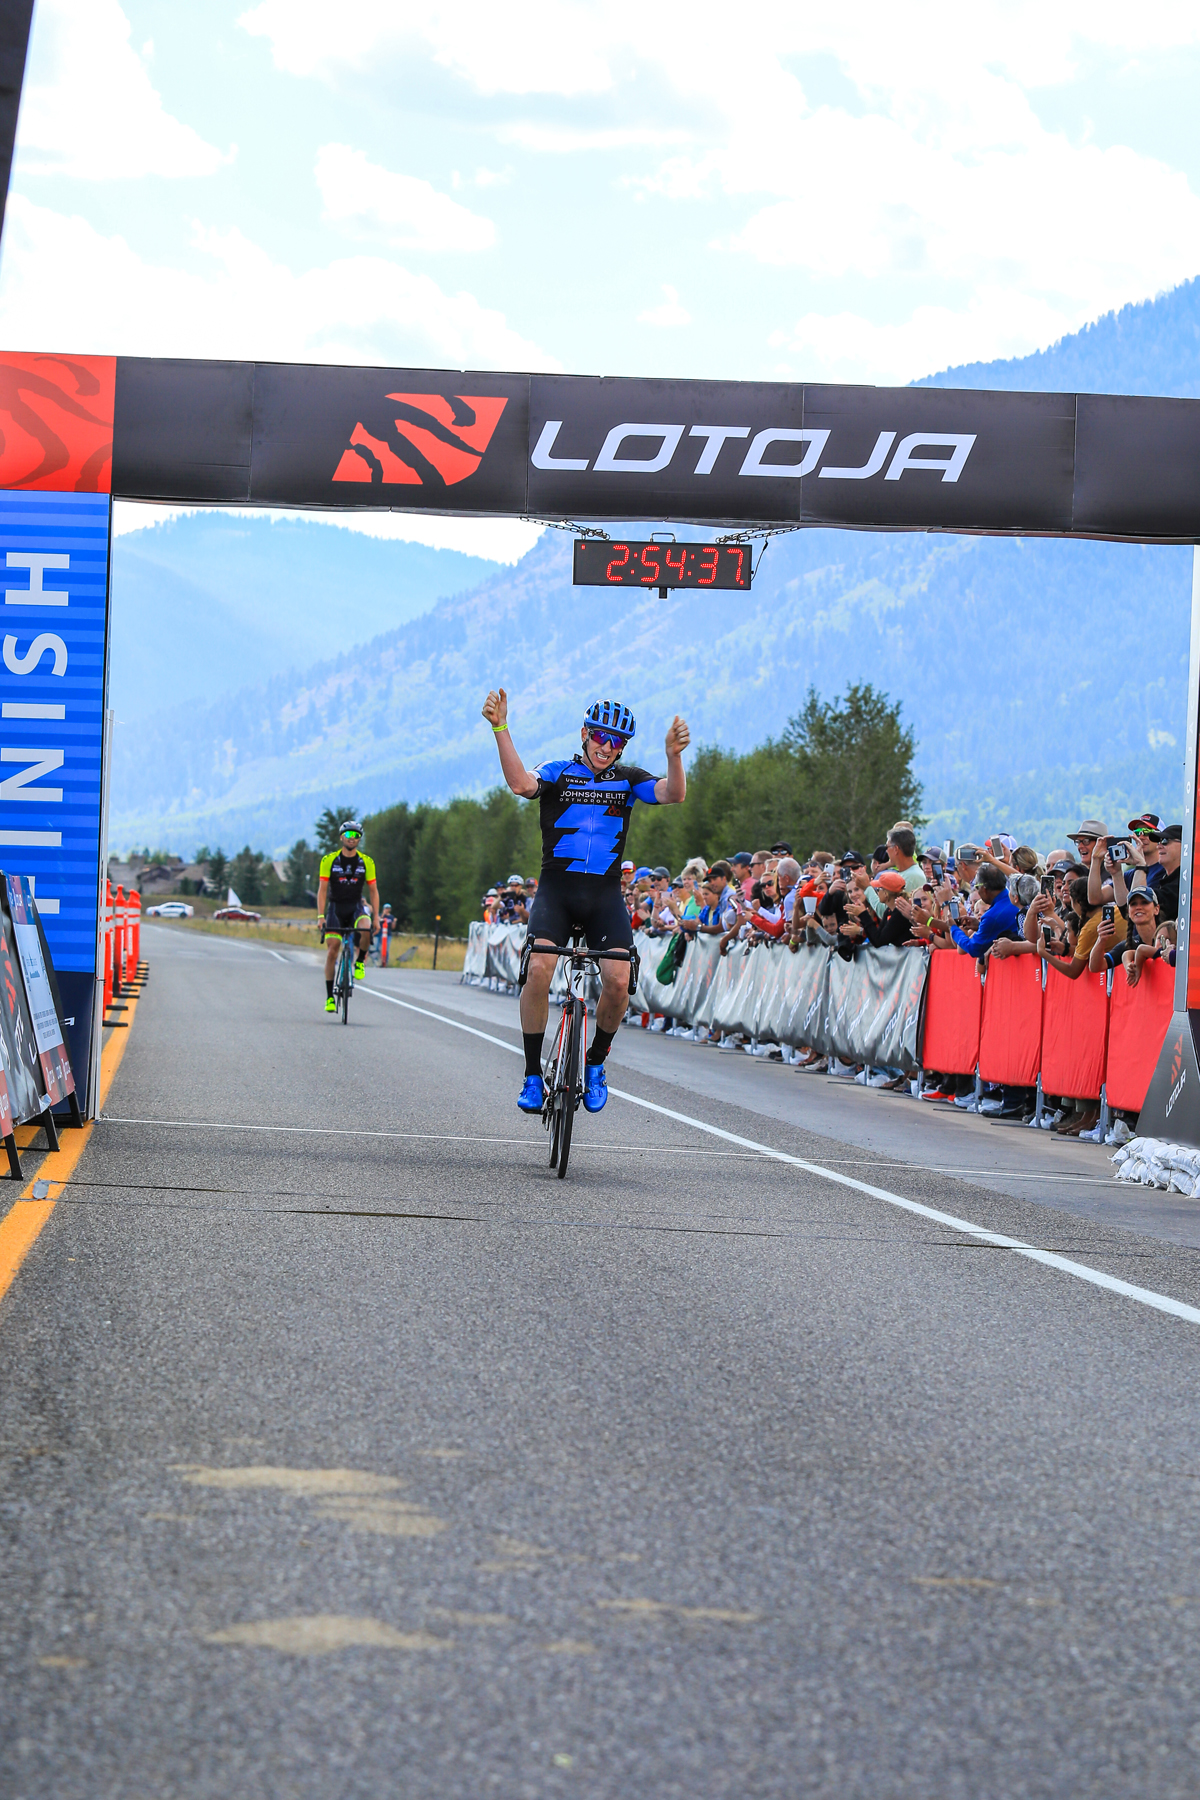 Roger Arnell (Johnson Elite Orthodontics) celebrates after winning the Men's Pro 123 race in the 37th Annual LoToJa Classic held on September 7, 2019. Arnell finished the 202-mile course in 8:45:51. Photo courtesy of Snake River Photo